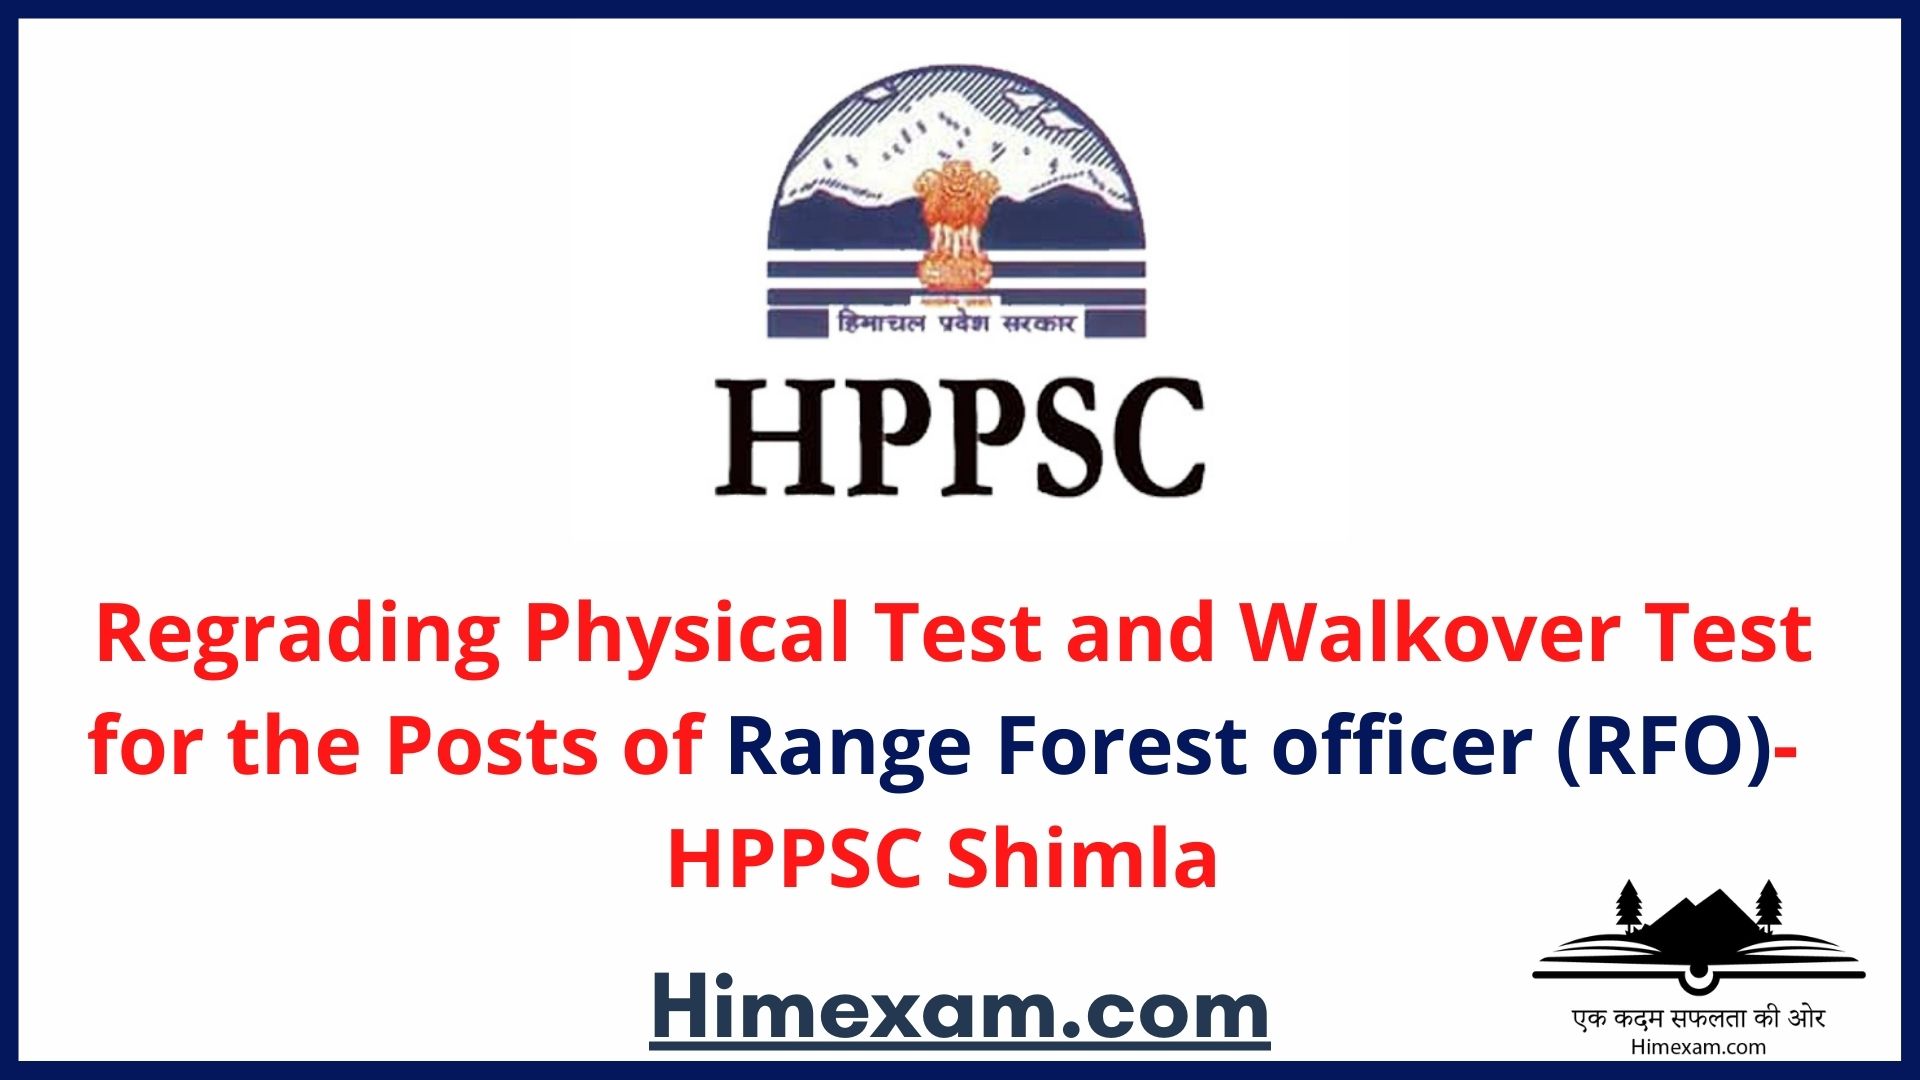 Regrading Physical Test and Walkover Test for the Posts of Range Forest officer (RFO)-HPPSC Shimla